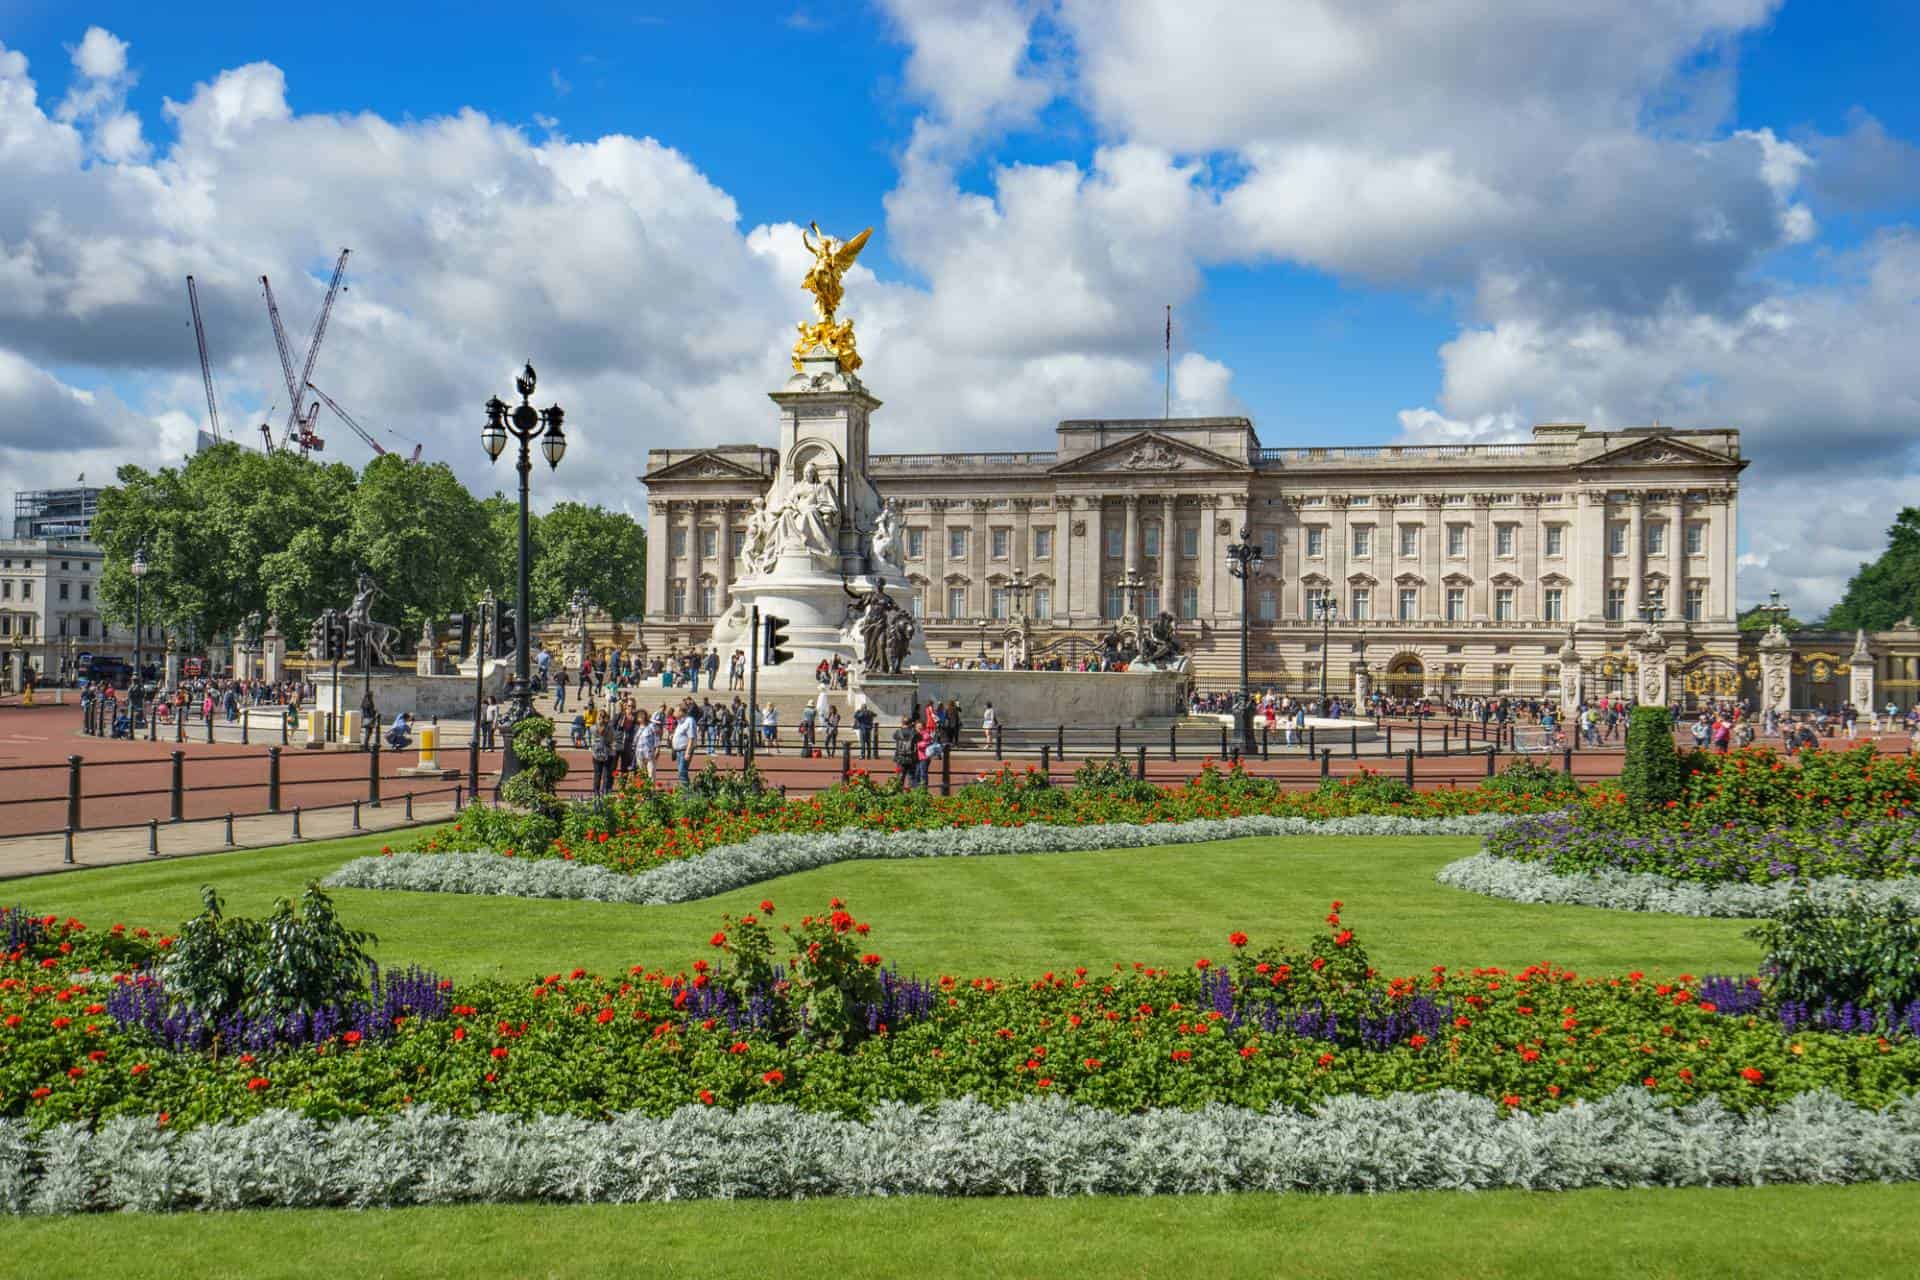 What were the late Queen Elizabeth’s royal residences?